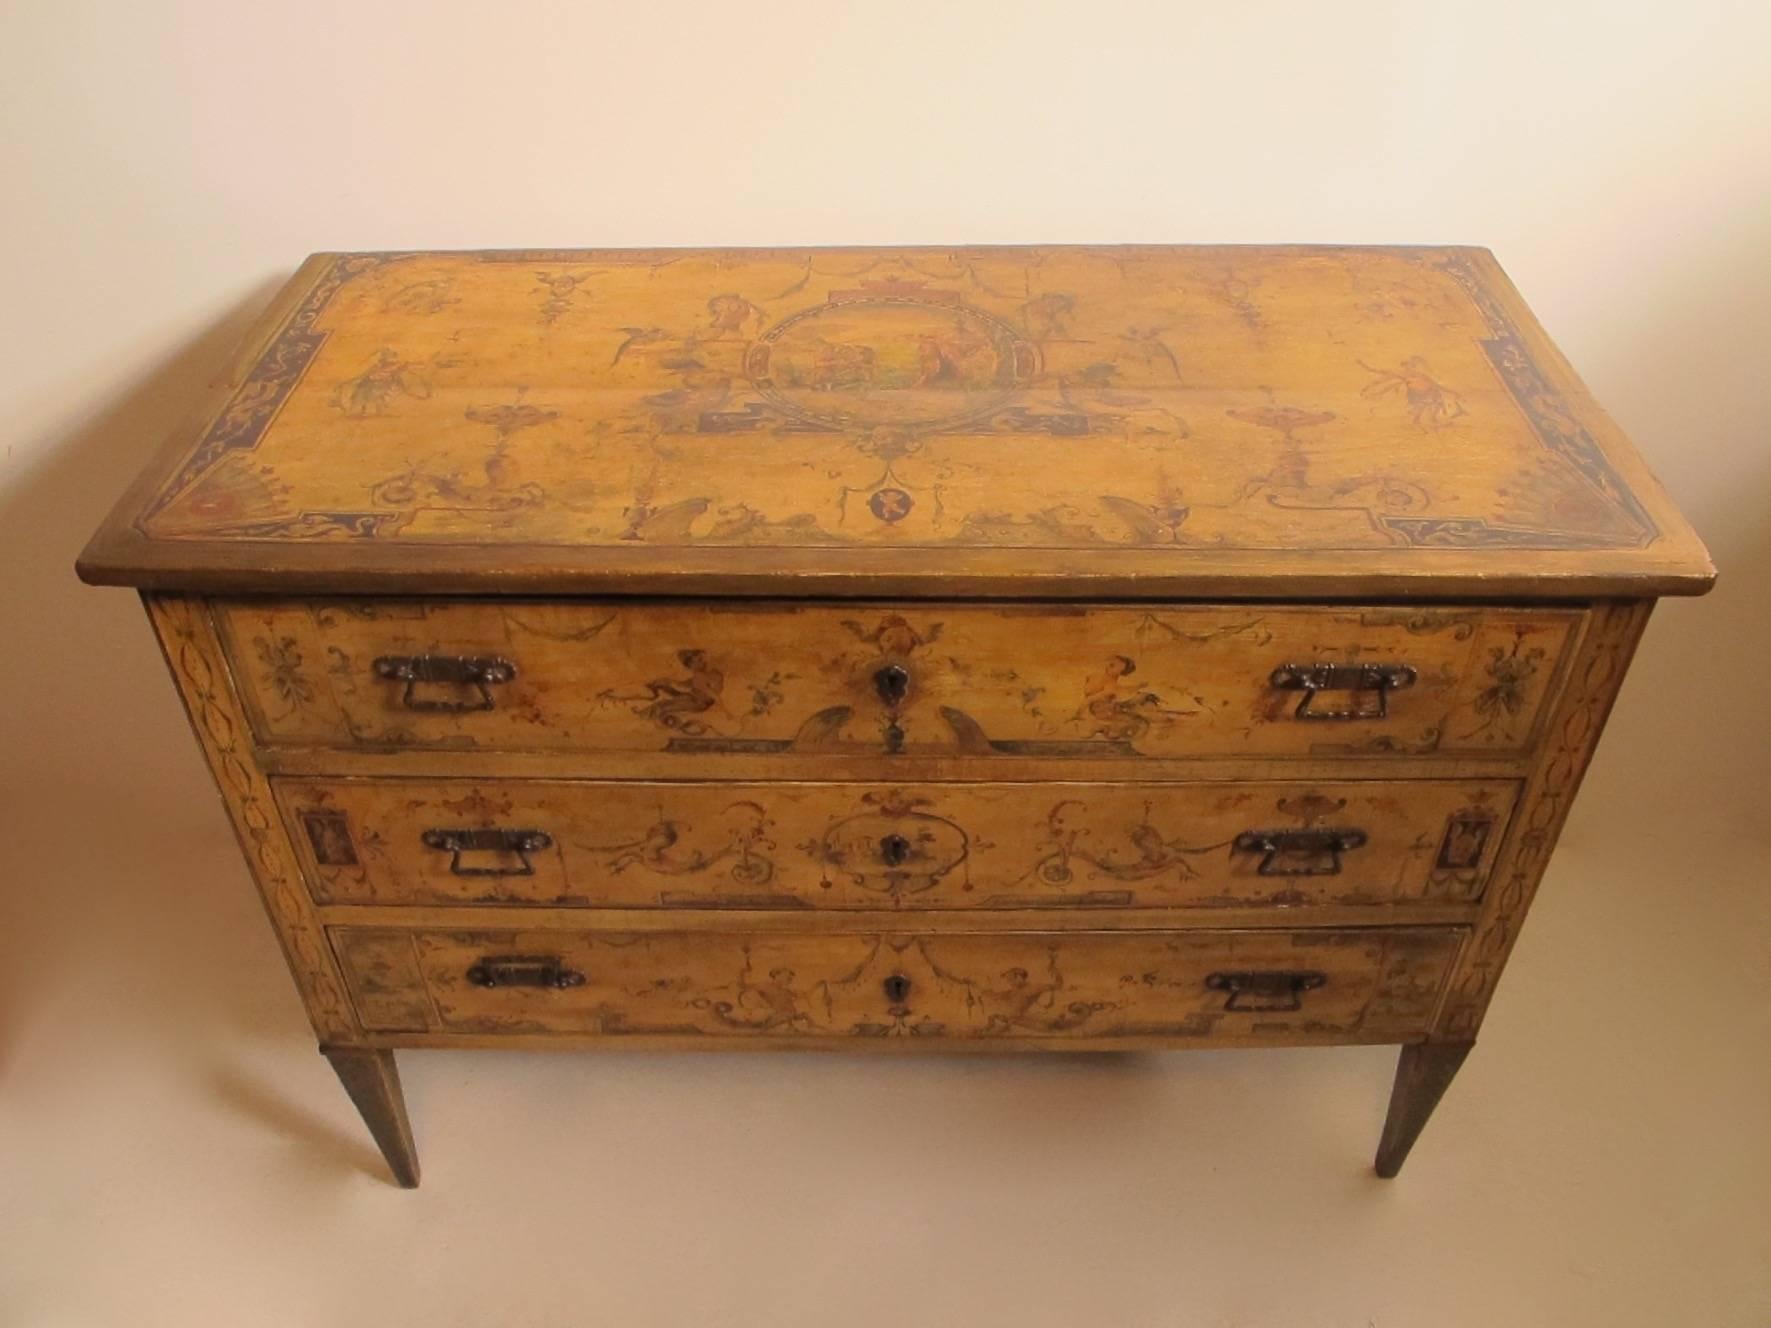 An Italian Renaissance style hand-painted three-drawer commode with later hardware. Decorated throughout with great detailing, showing the Medici Family Crest or Coat of Arms, and each drawer lined with wonderful old Italian paper, Italy, late 17th